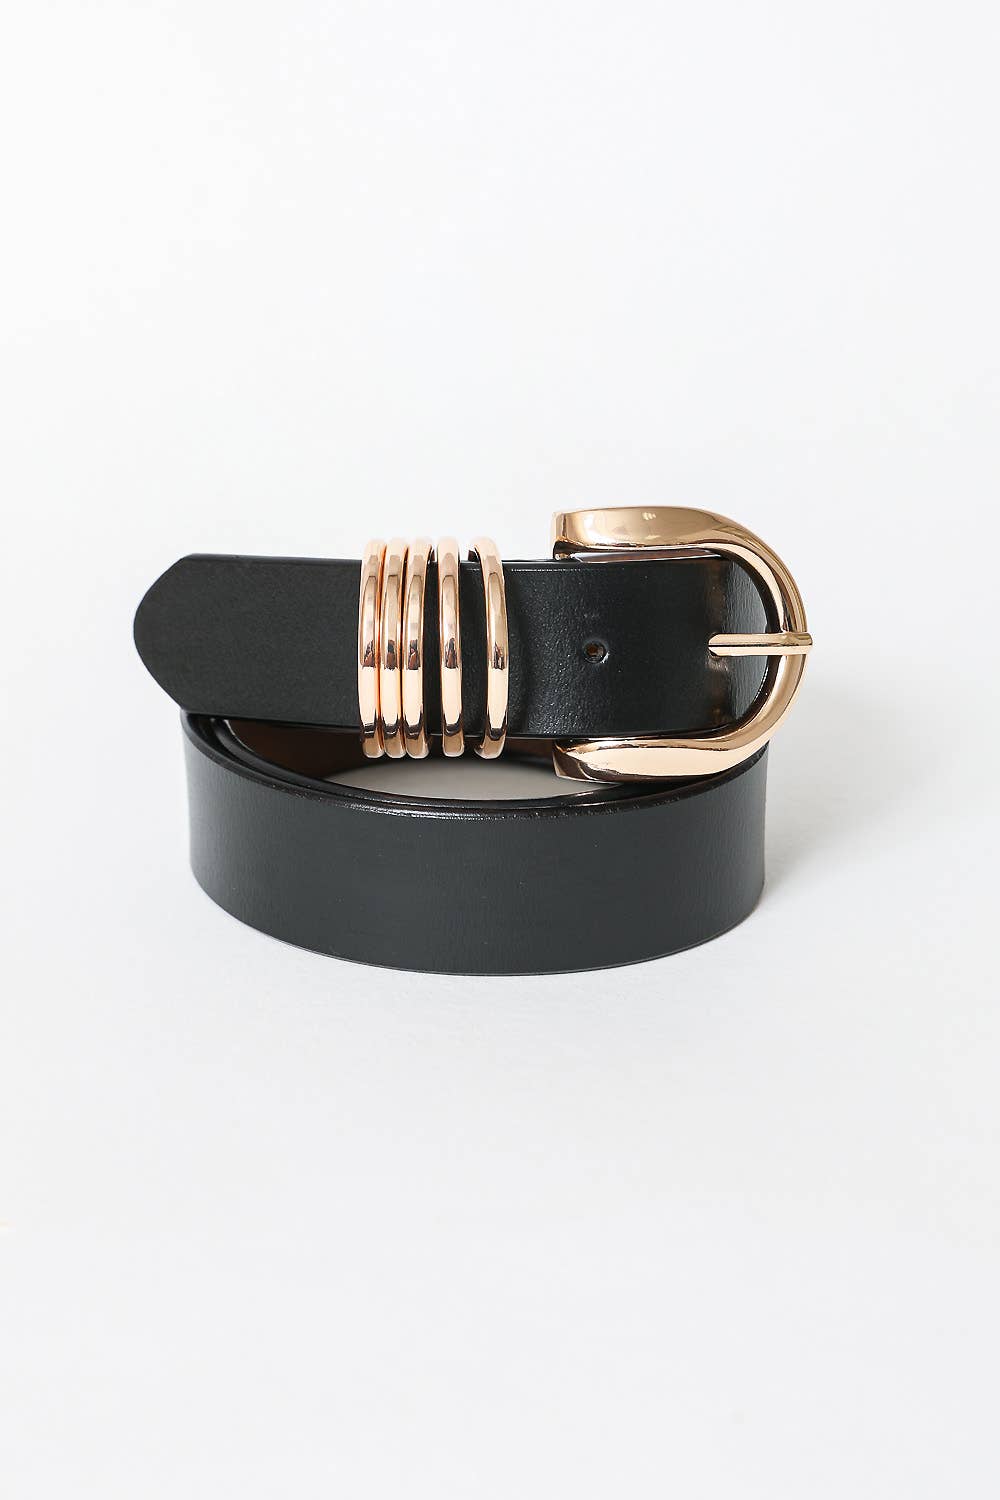 Gold Buckle Belt: Taupe and Black